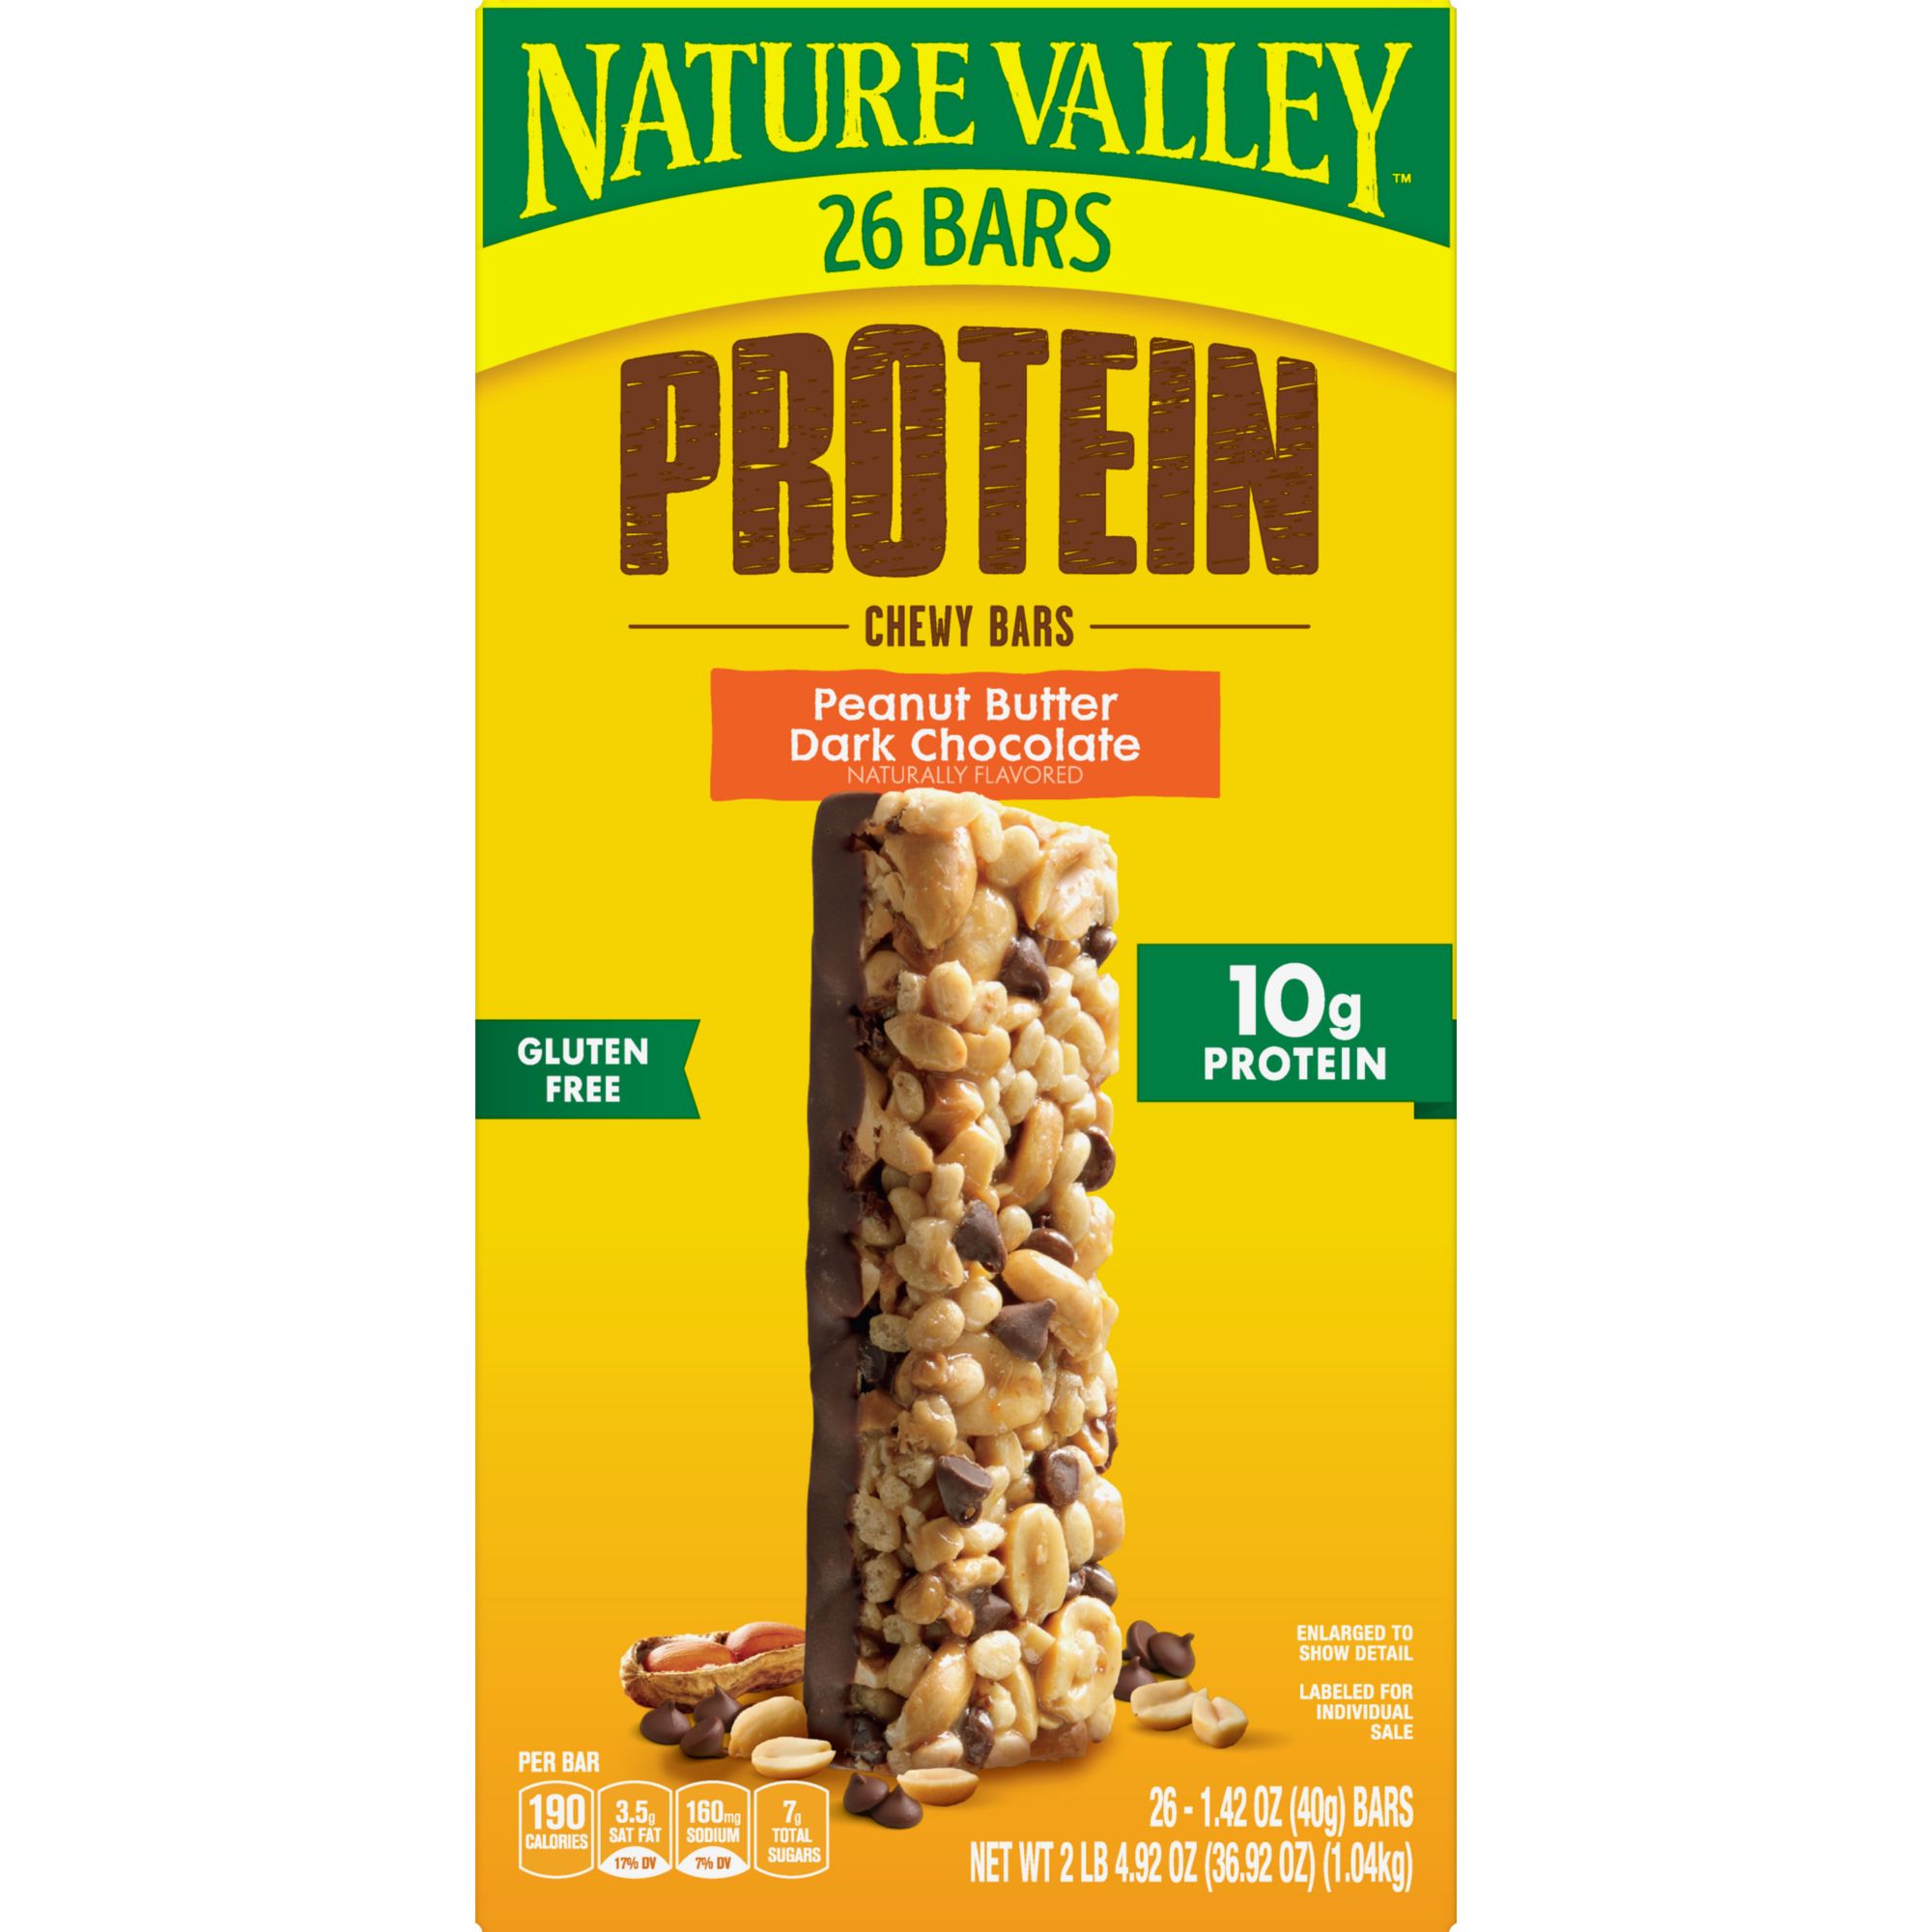 Nature Valley Peanut Butter Chocolate Protein Chewy Bars